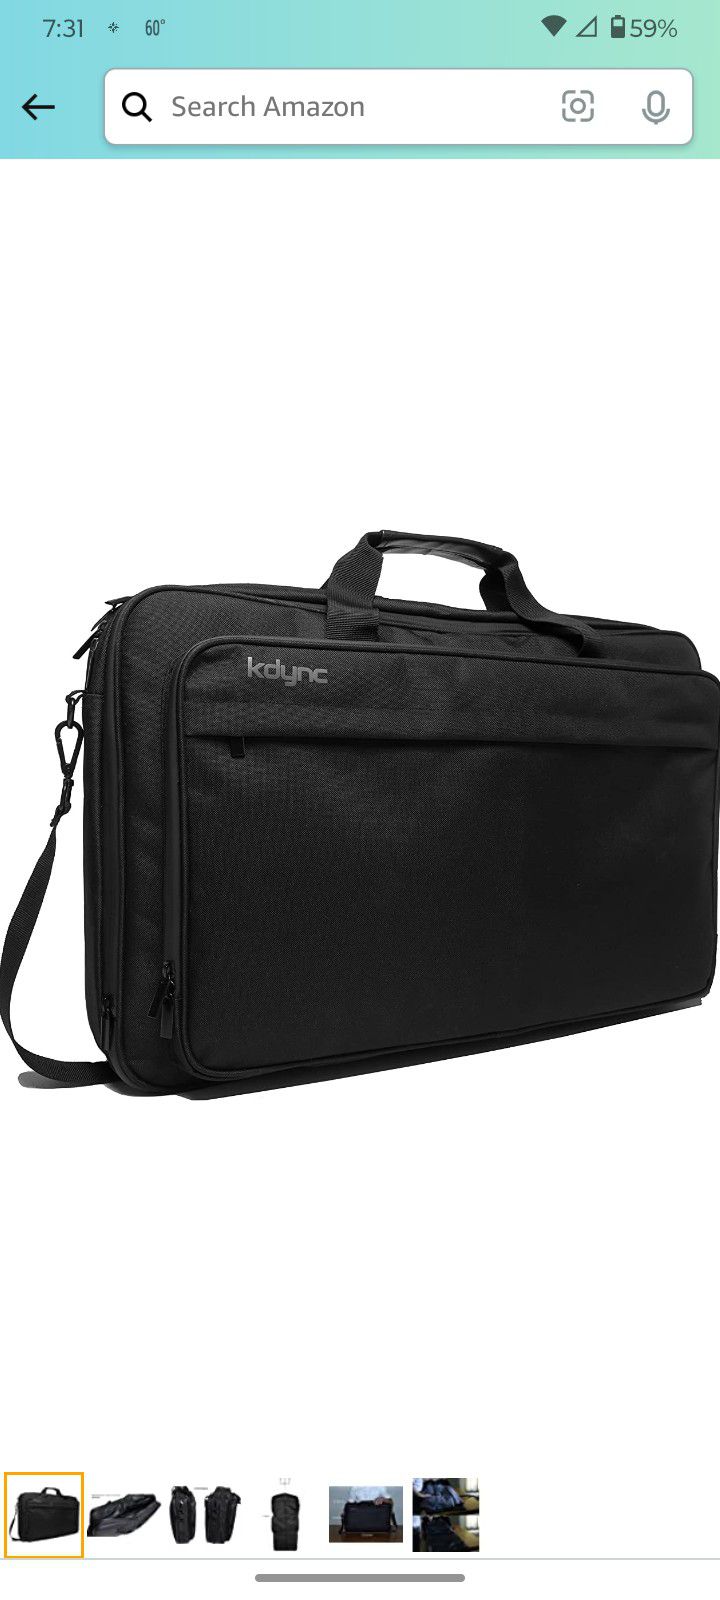 Kdync Suit Travel Bag For Garments  & Business Trips (Expandable) New 